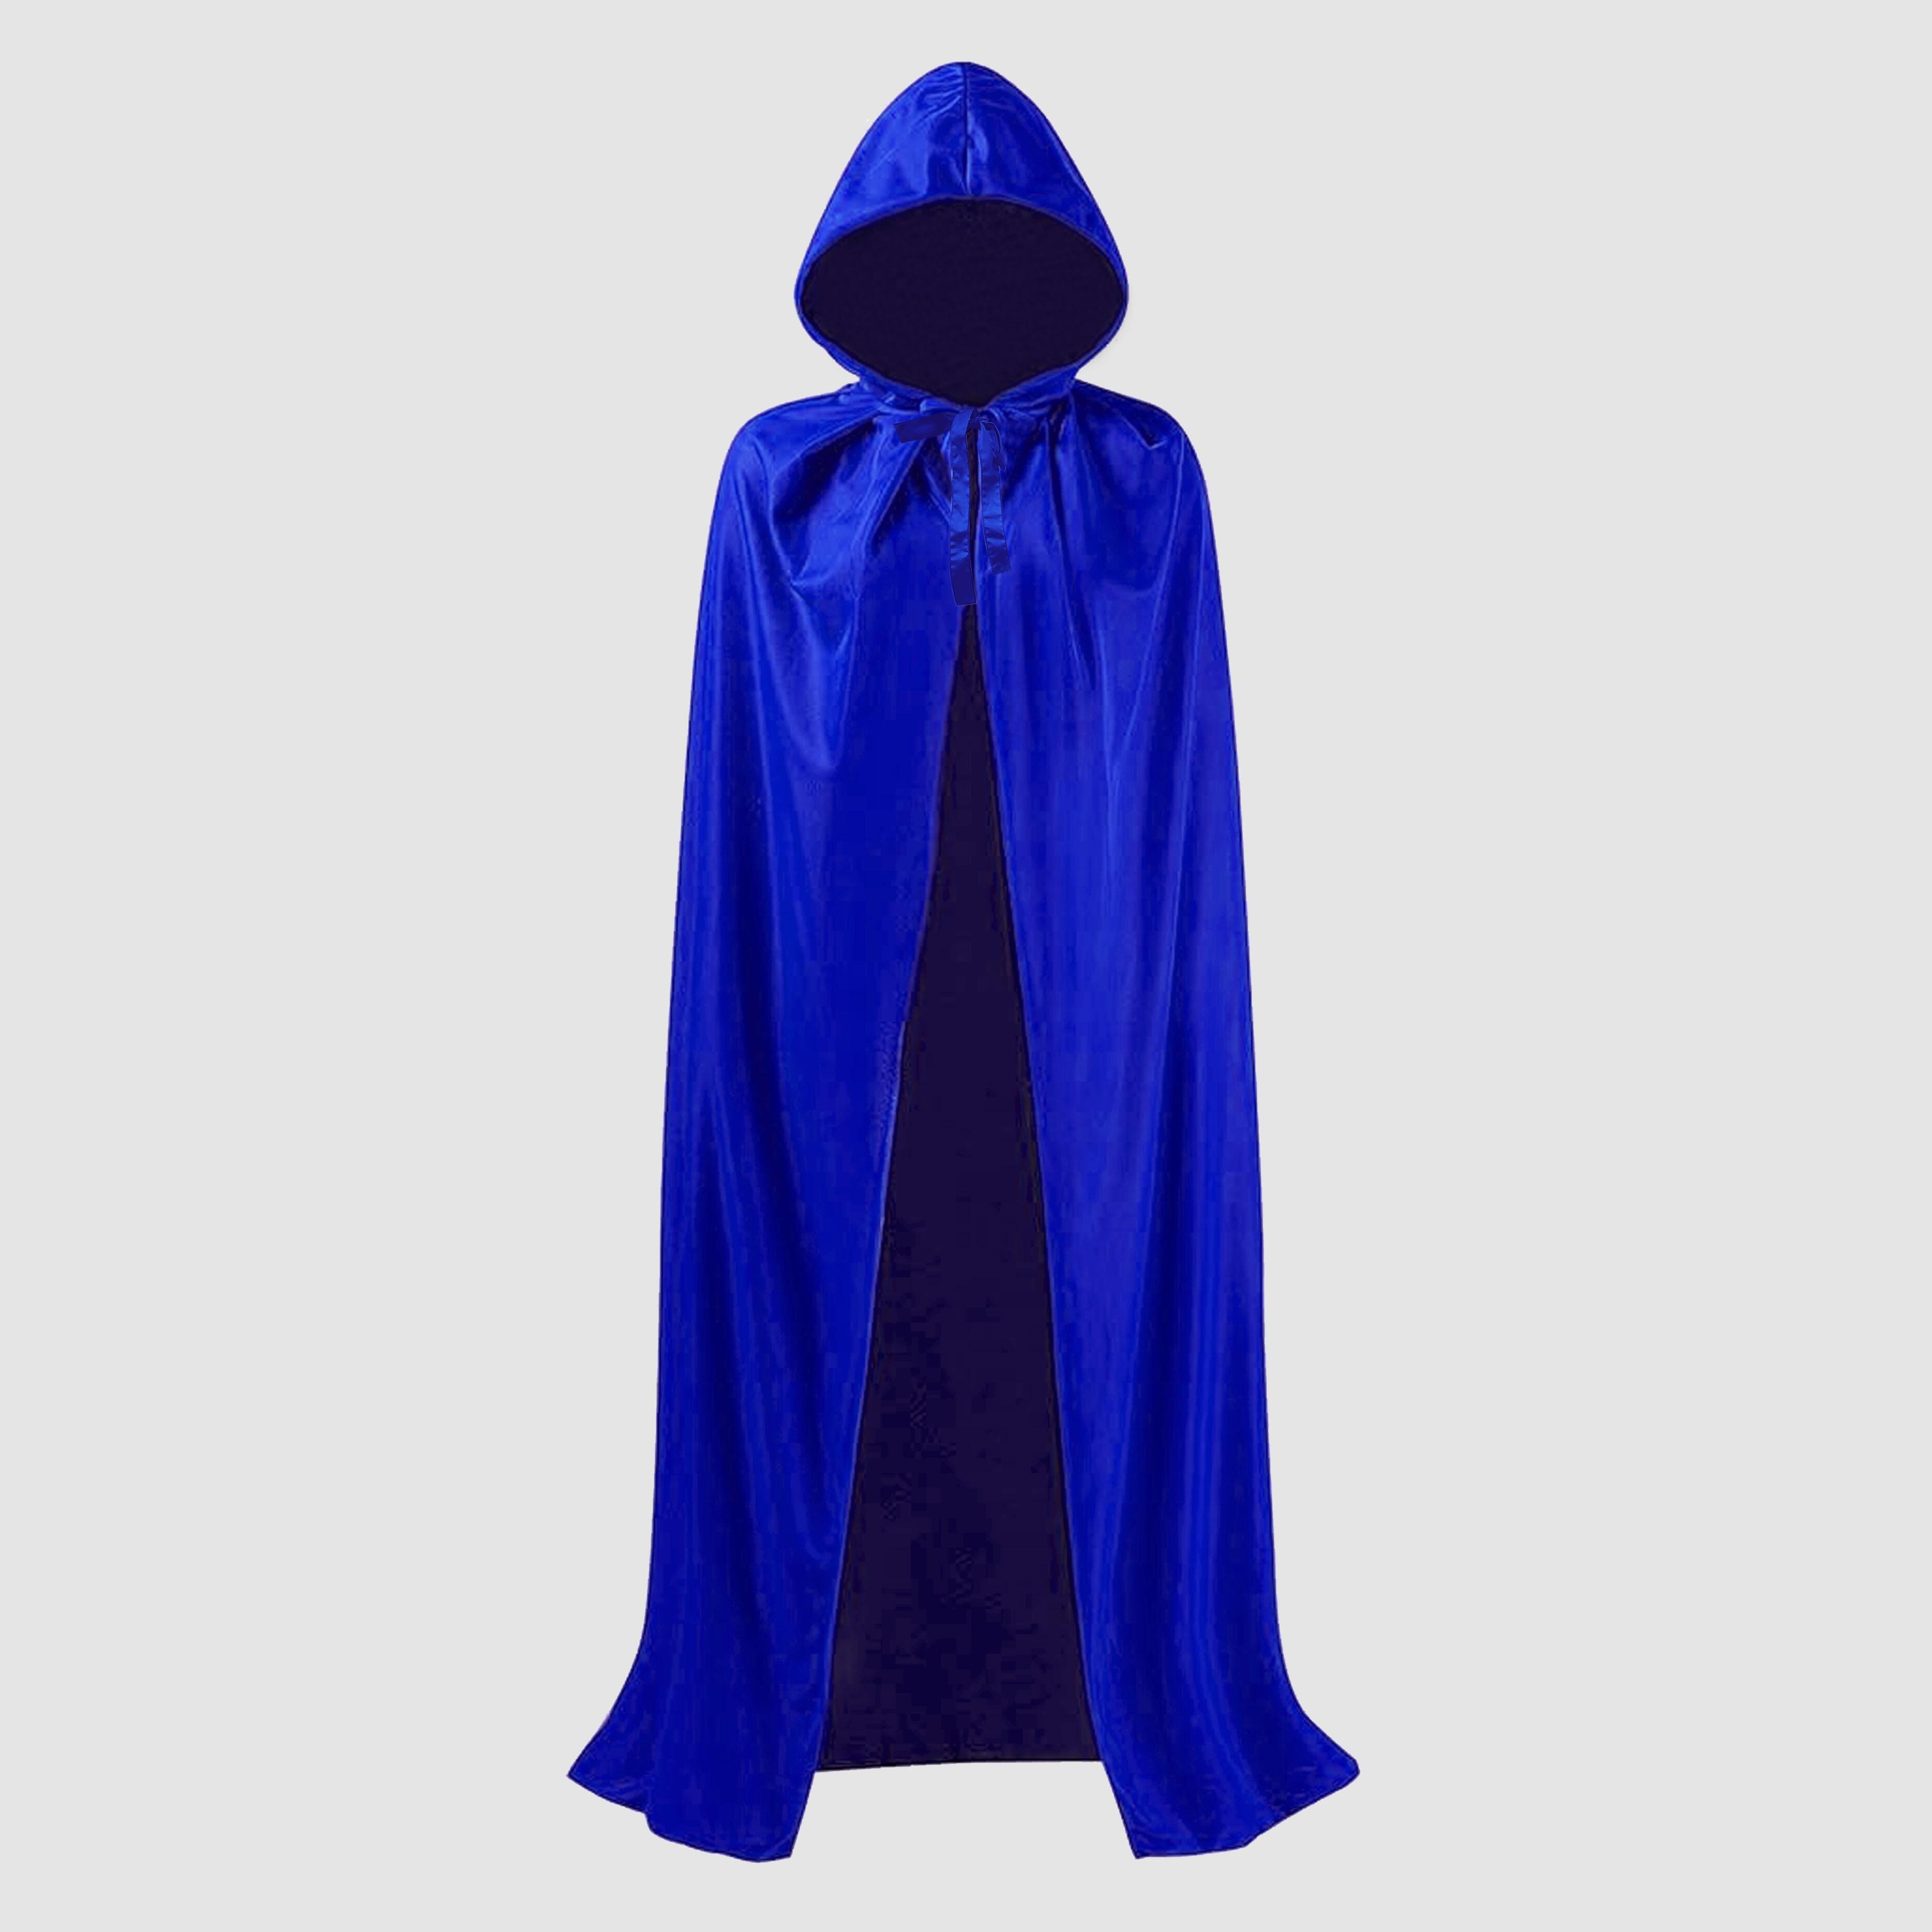 Nibano Hooded Show Gown Royal Blue